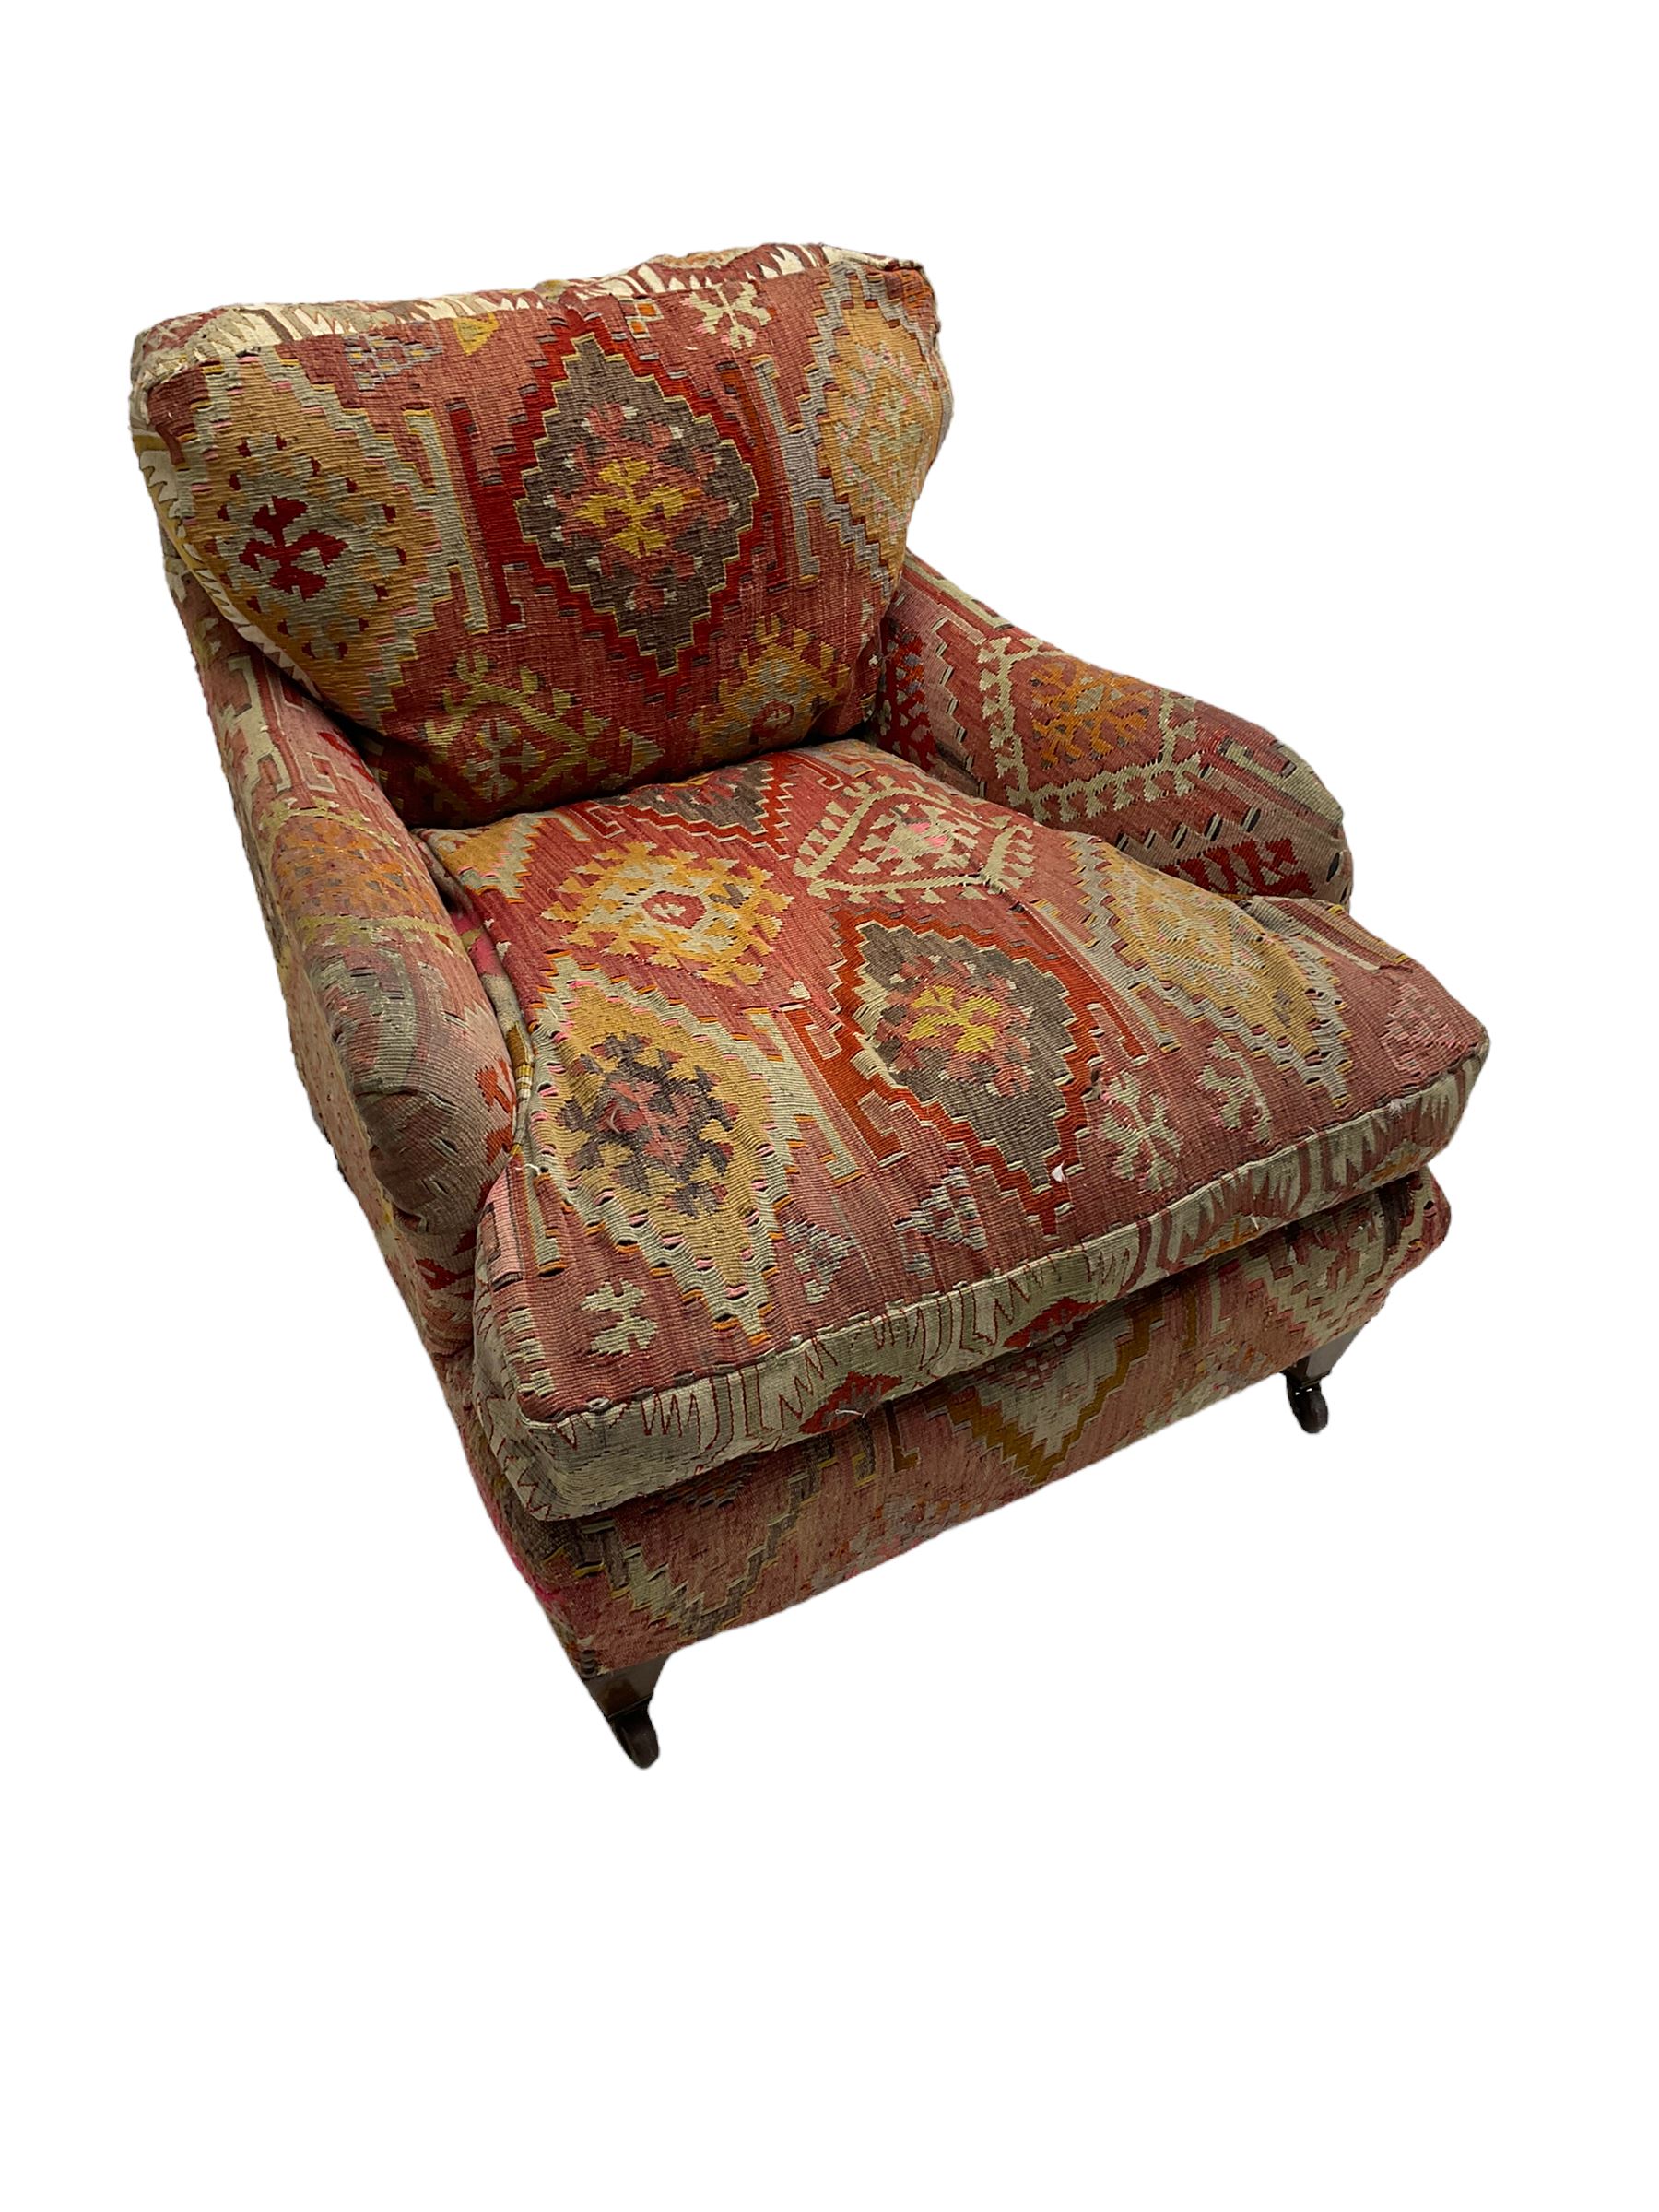 Early 20th century Howard style armchair - Image 5 of 5